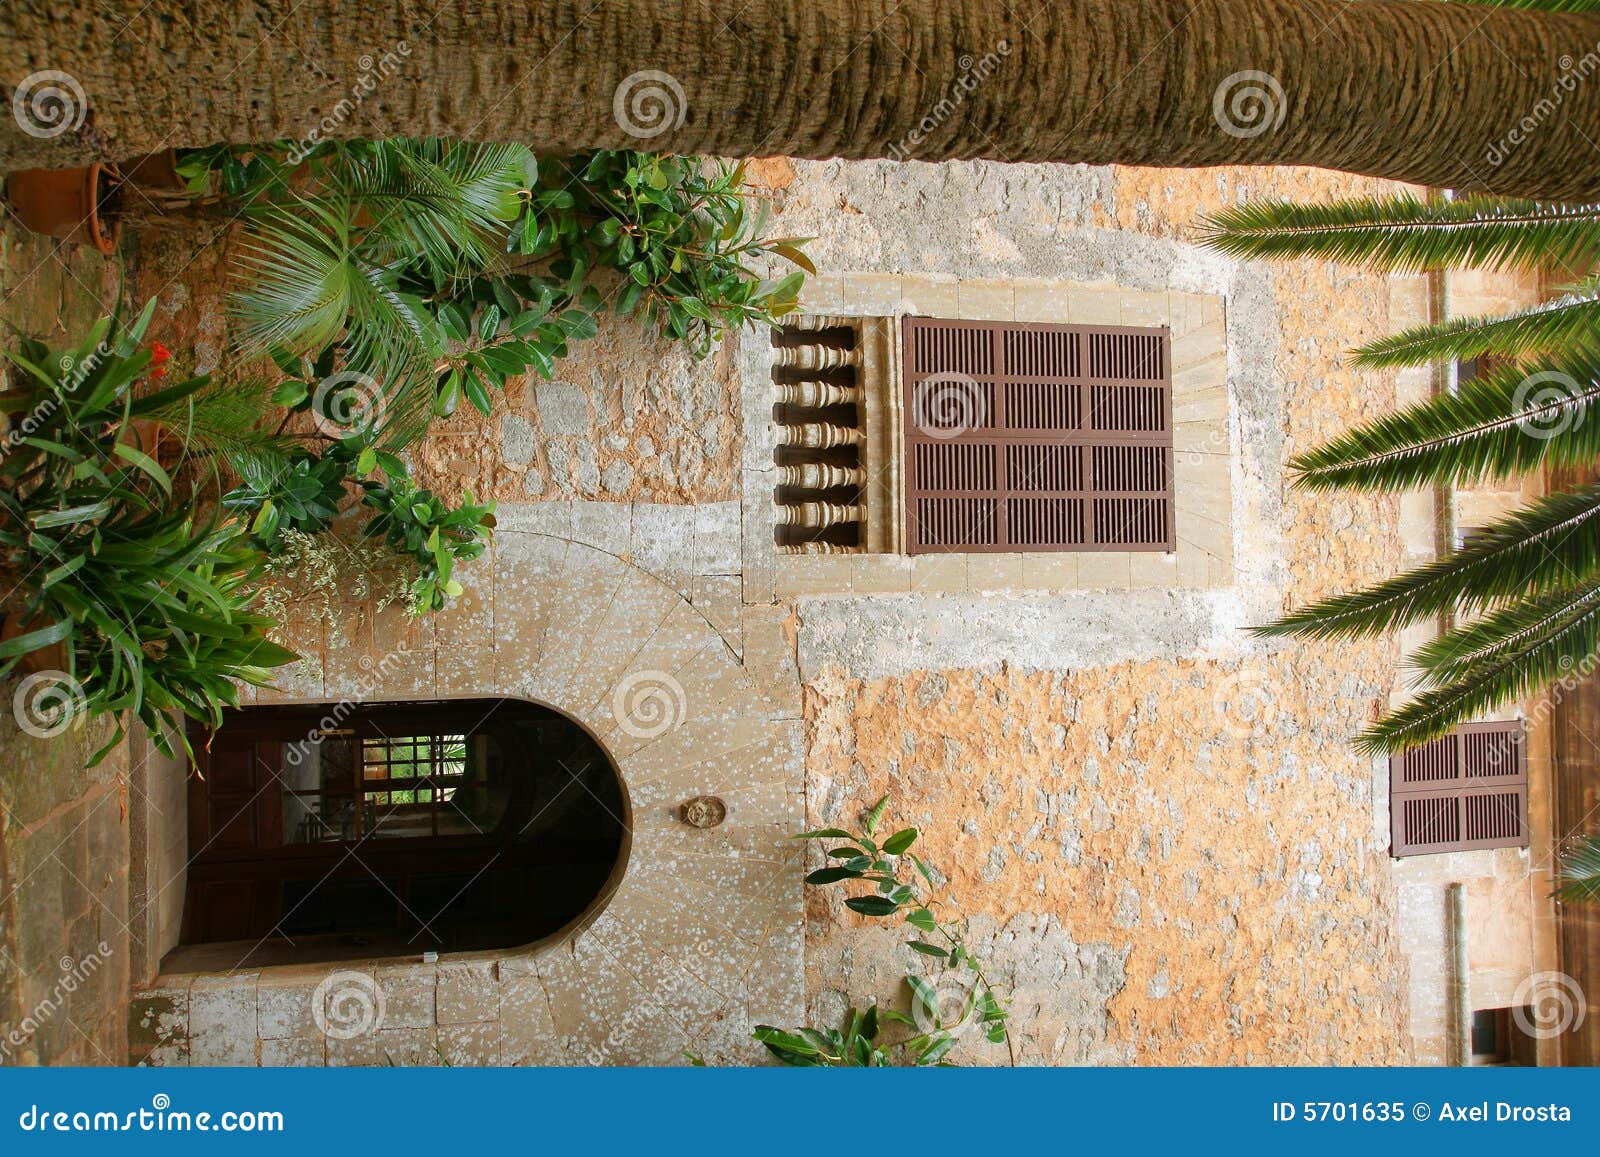  Traditional Spanish house stock image Image of outdoors 